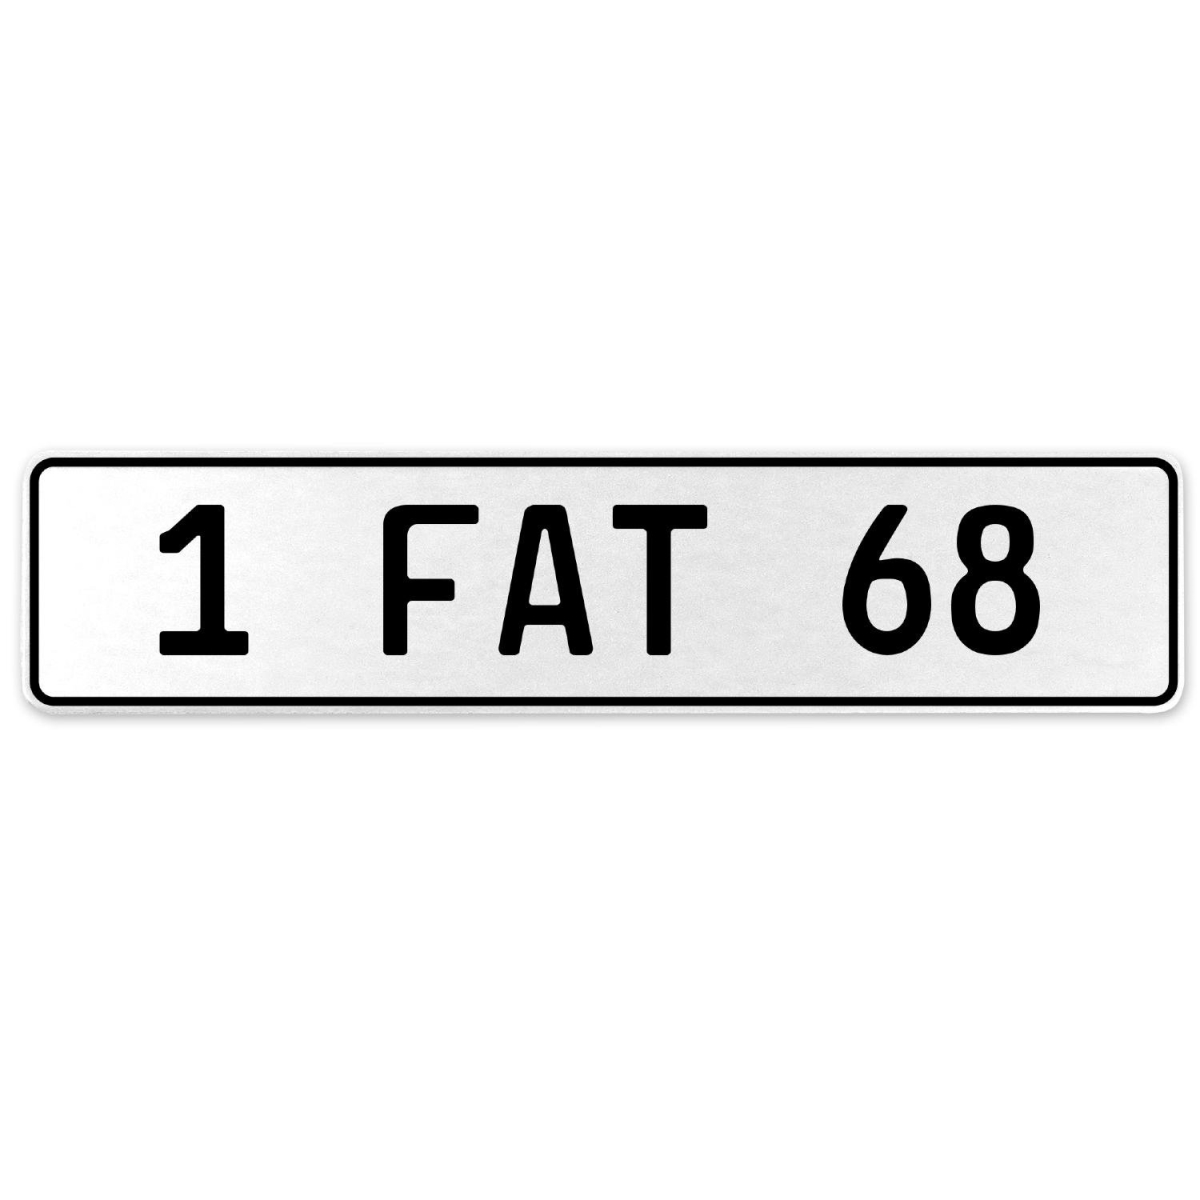 554665 1 Fat 68 - White Aluminum Street Sign Mancave Euro Plate Name Door Sign Wall